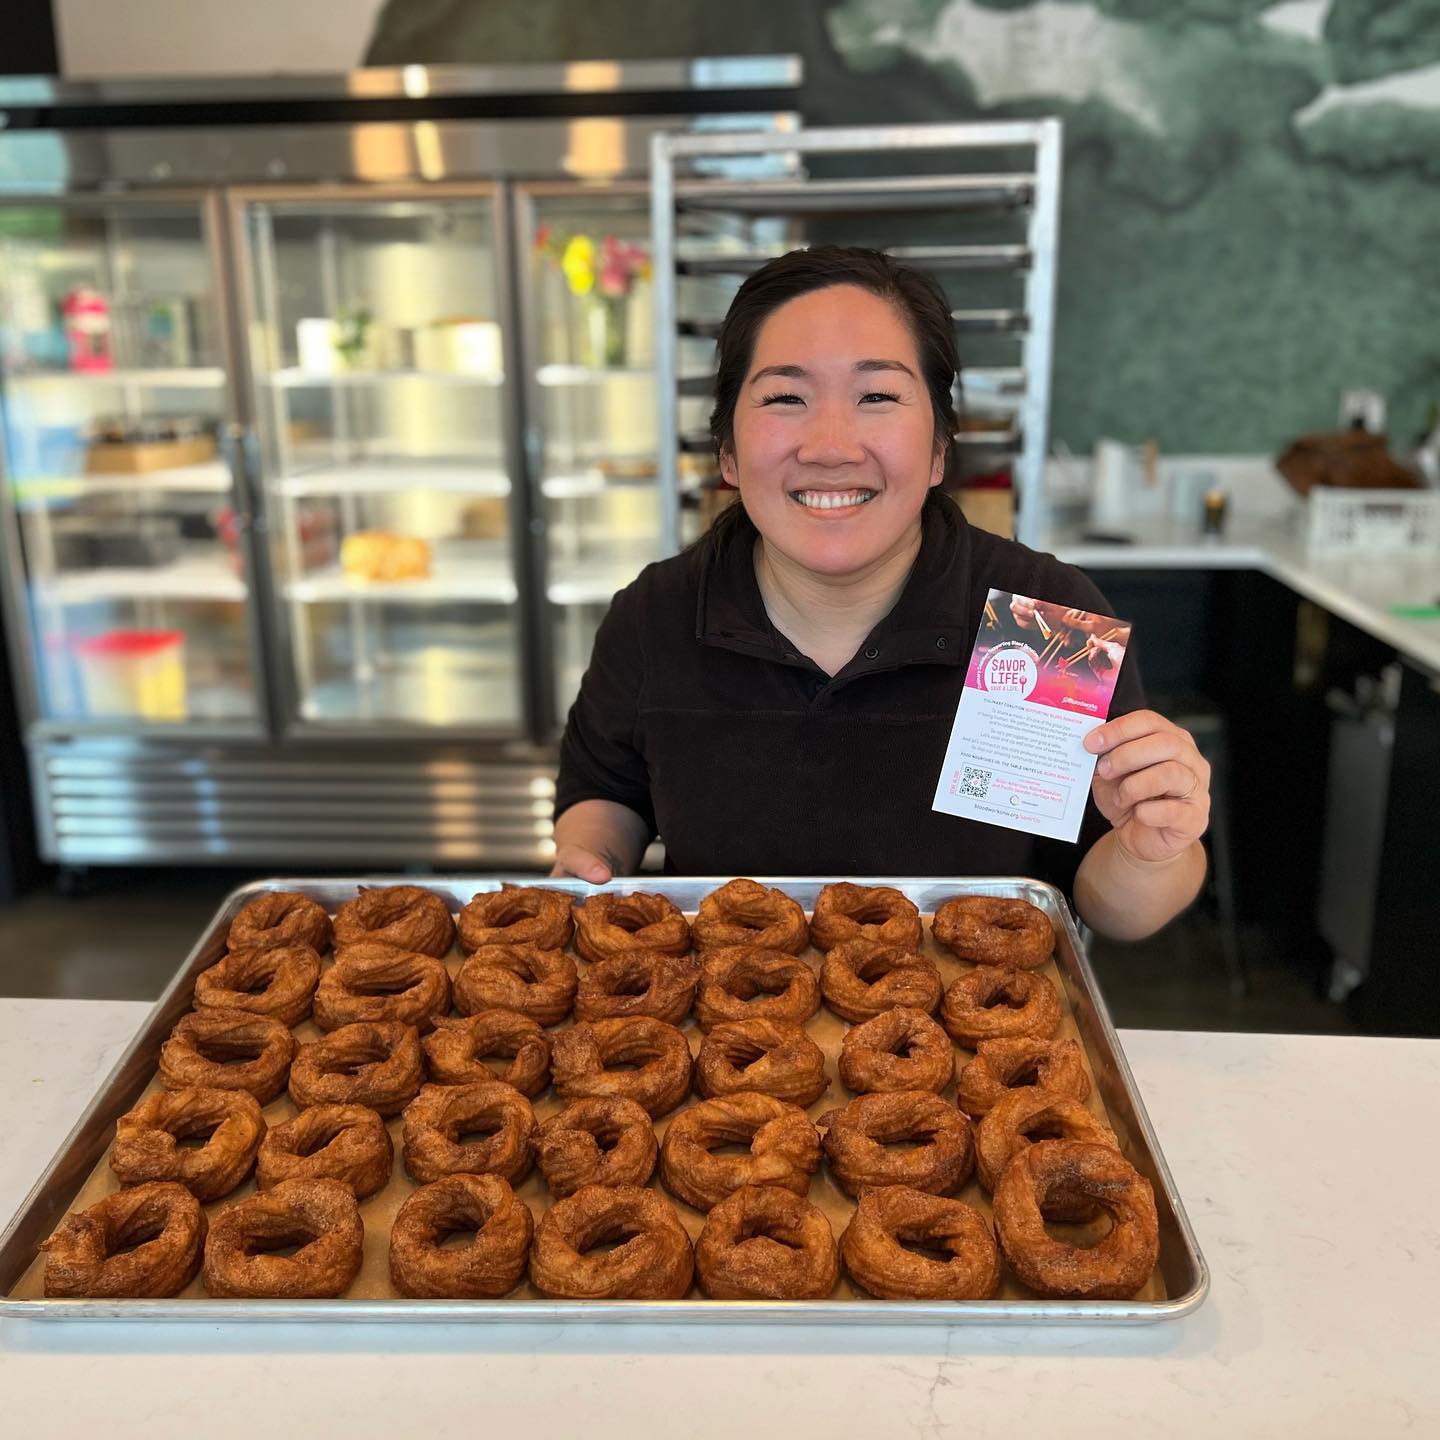 Doughnut forget to sign up to donate blood!

HUGE thanks to Mi Kim of @raiseddoughnutsandcakes for being a part of the Savor Life. Save A Life. culinary community.

Throughout the month of May, go to @bloodworksnw Savor Life. Save A Life. (link in our bio), sign up to donate blood, and then enter to win two spots in an upcoming Raised Doughnuts and Cakes doughnut class in Seattle’s Central District!

Drop a 🍩 in the comments below if this post has made you excited to eat doughnuts after you donate!

#BeIntentional #SpendLikeItMatters #SavorLife